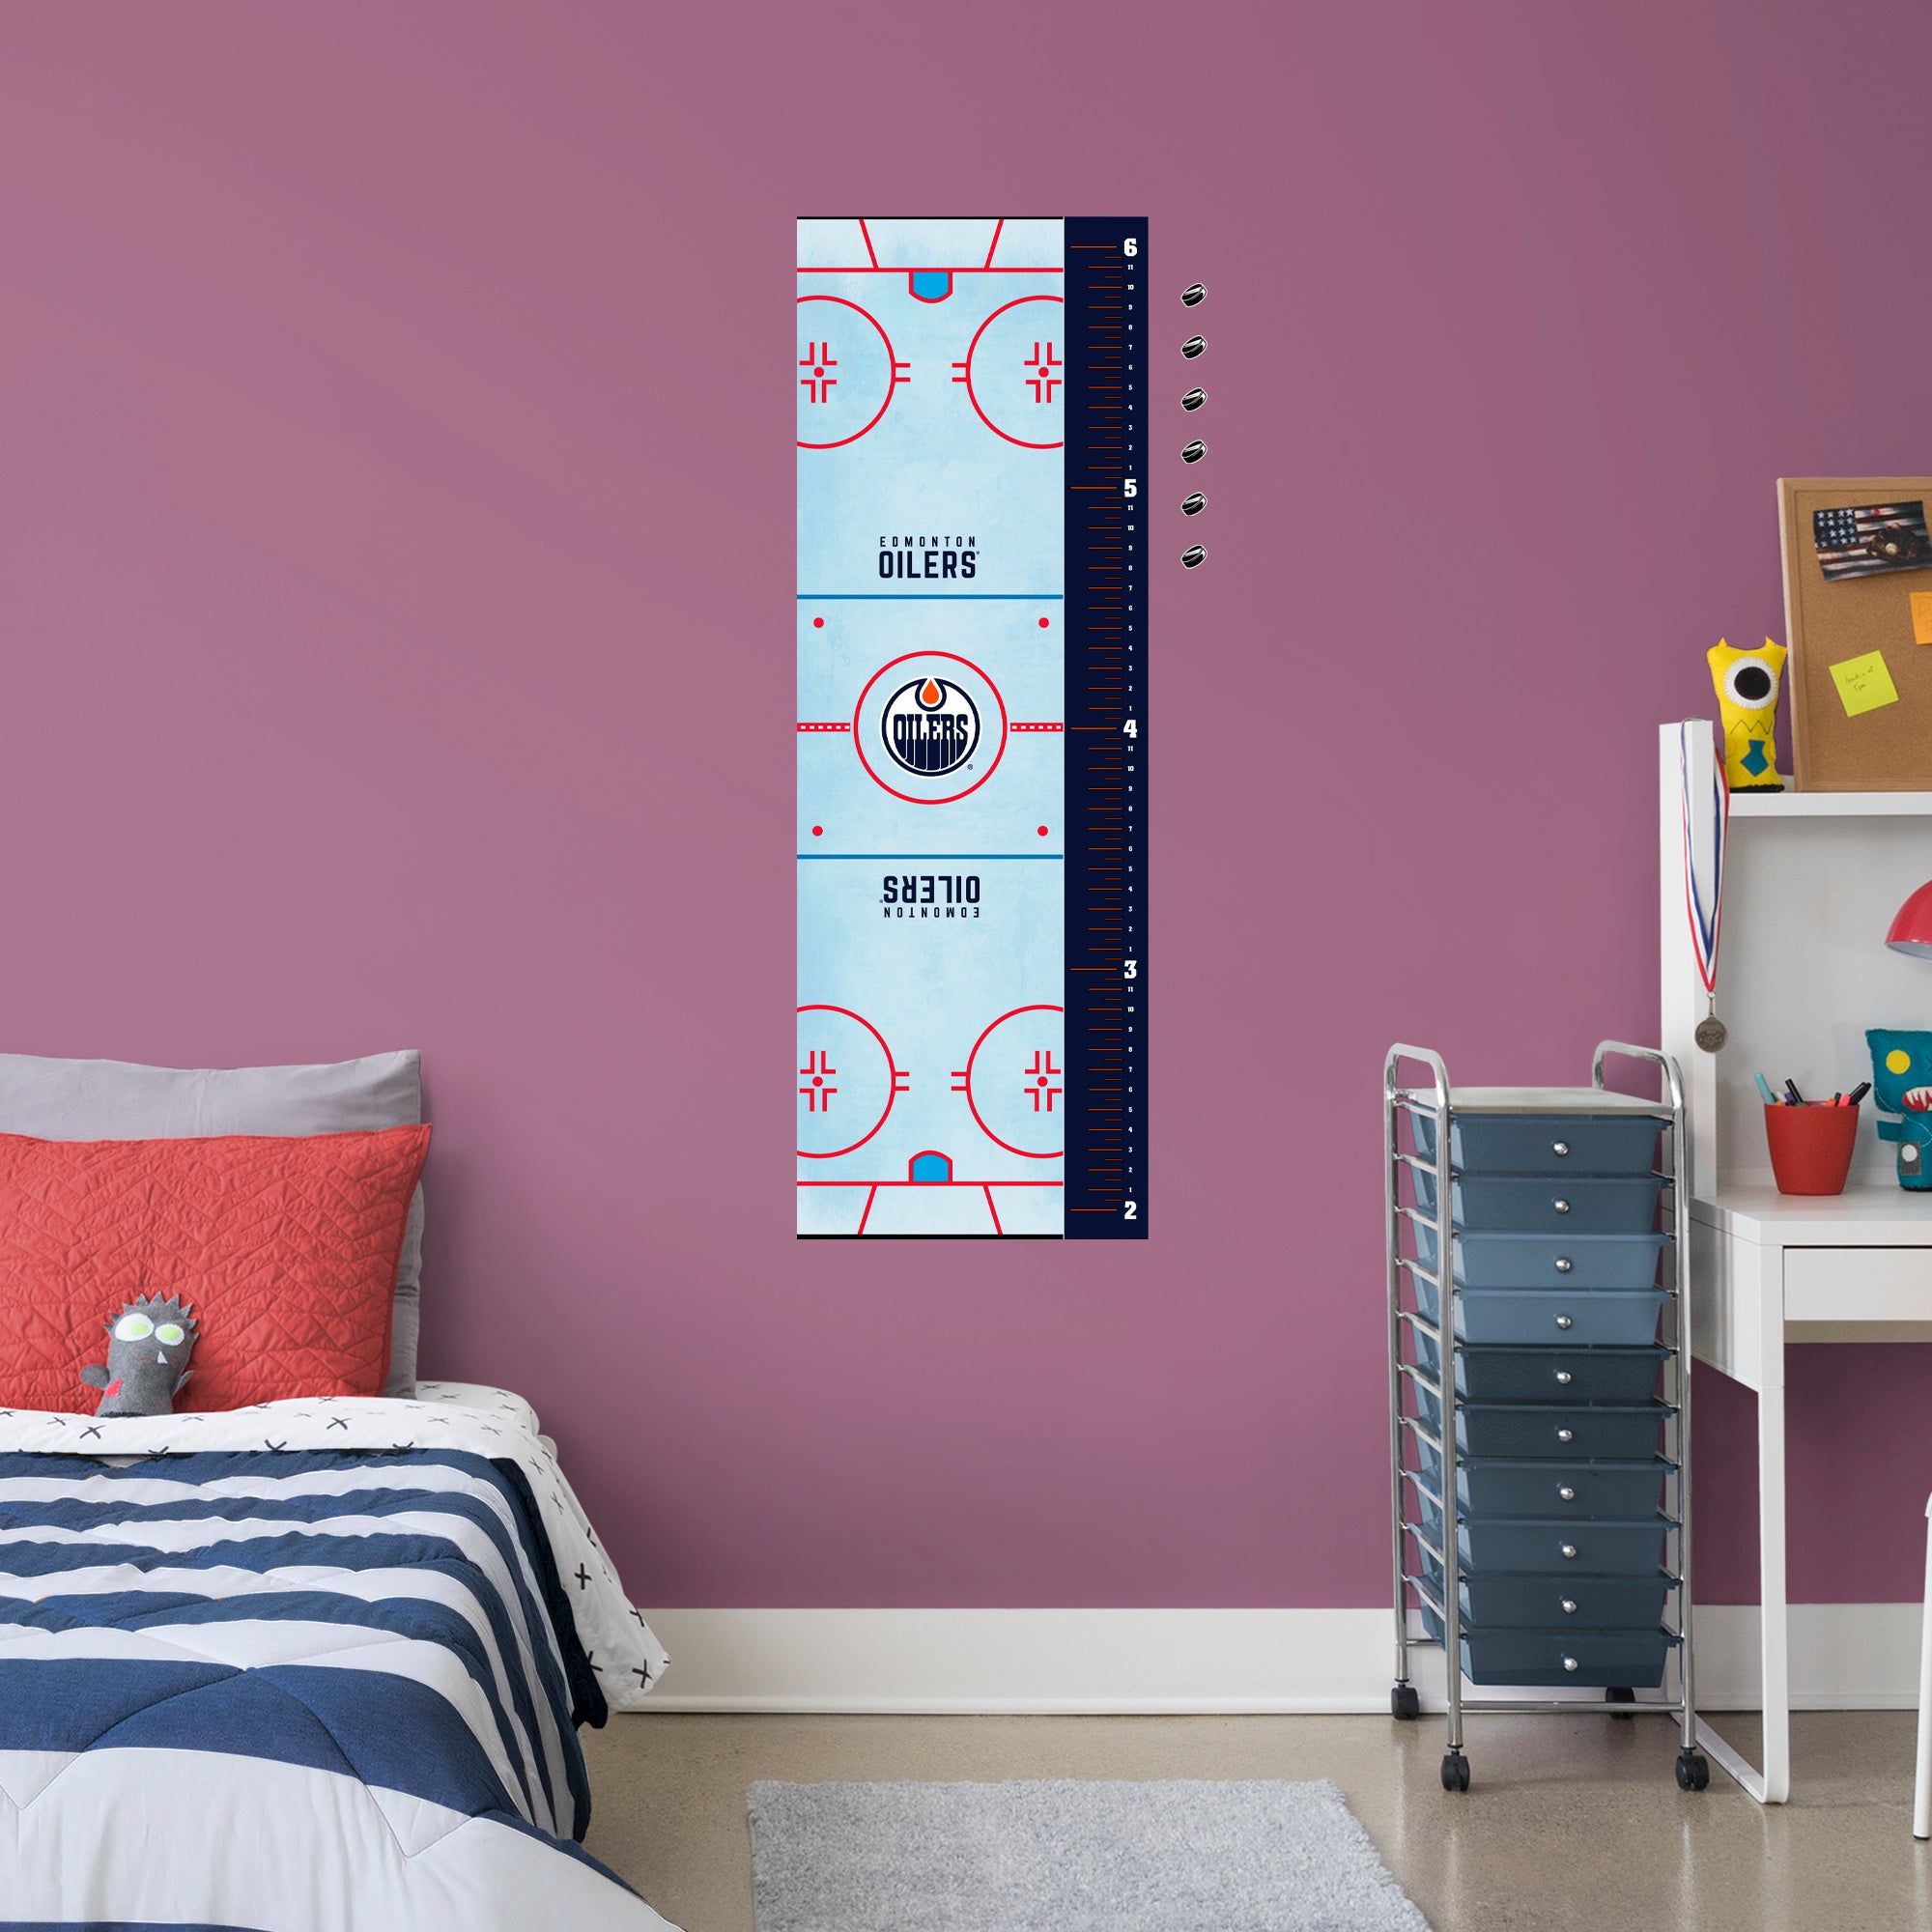 Edmonton Oilers: Rink Growth Chart - Officially Licensed NHL Removable Wall Graphic Large by Fathead | Vinyl